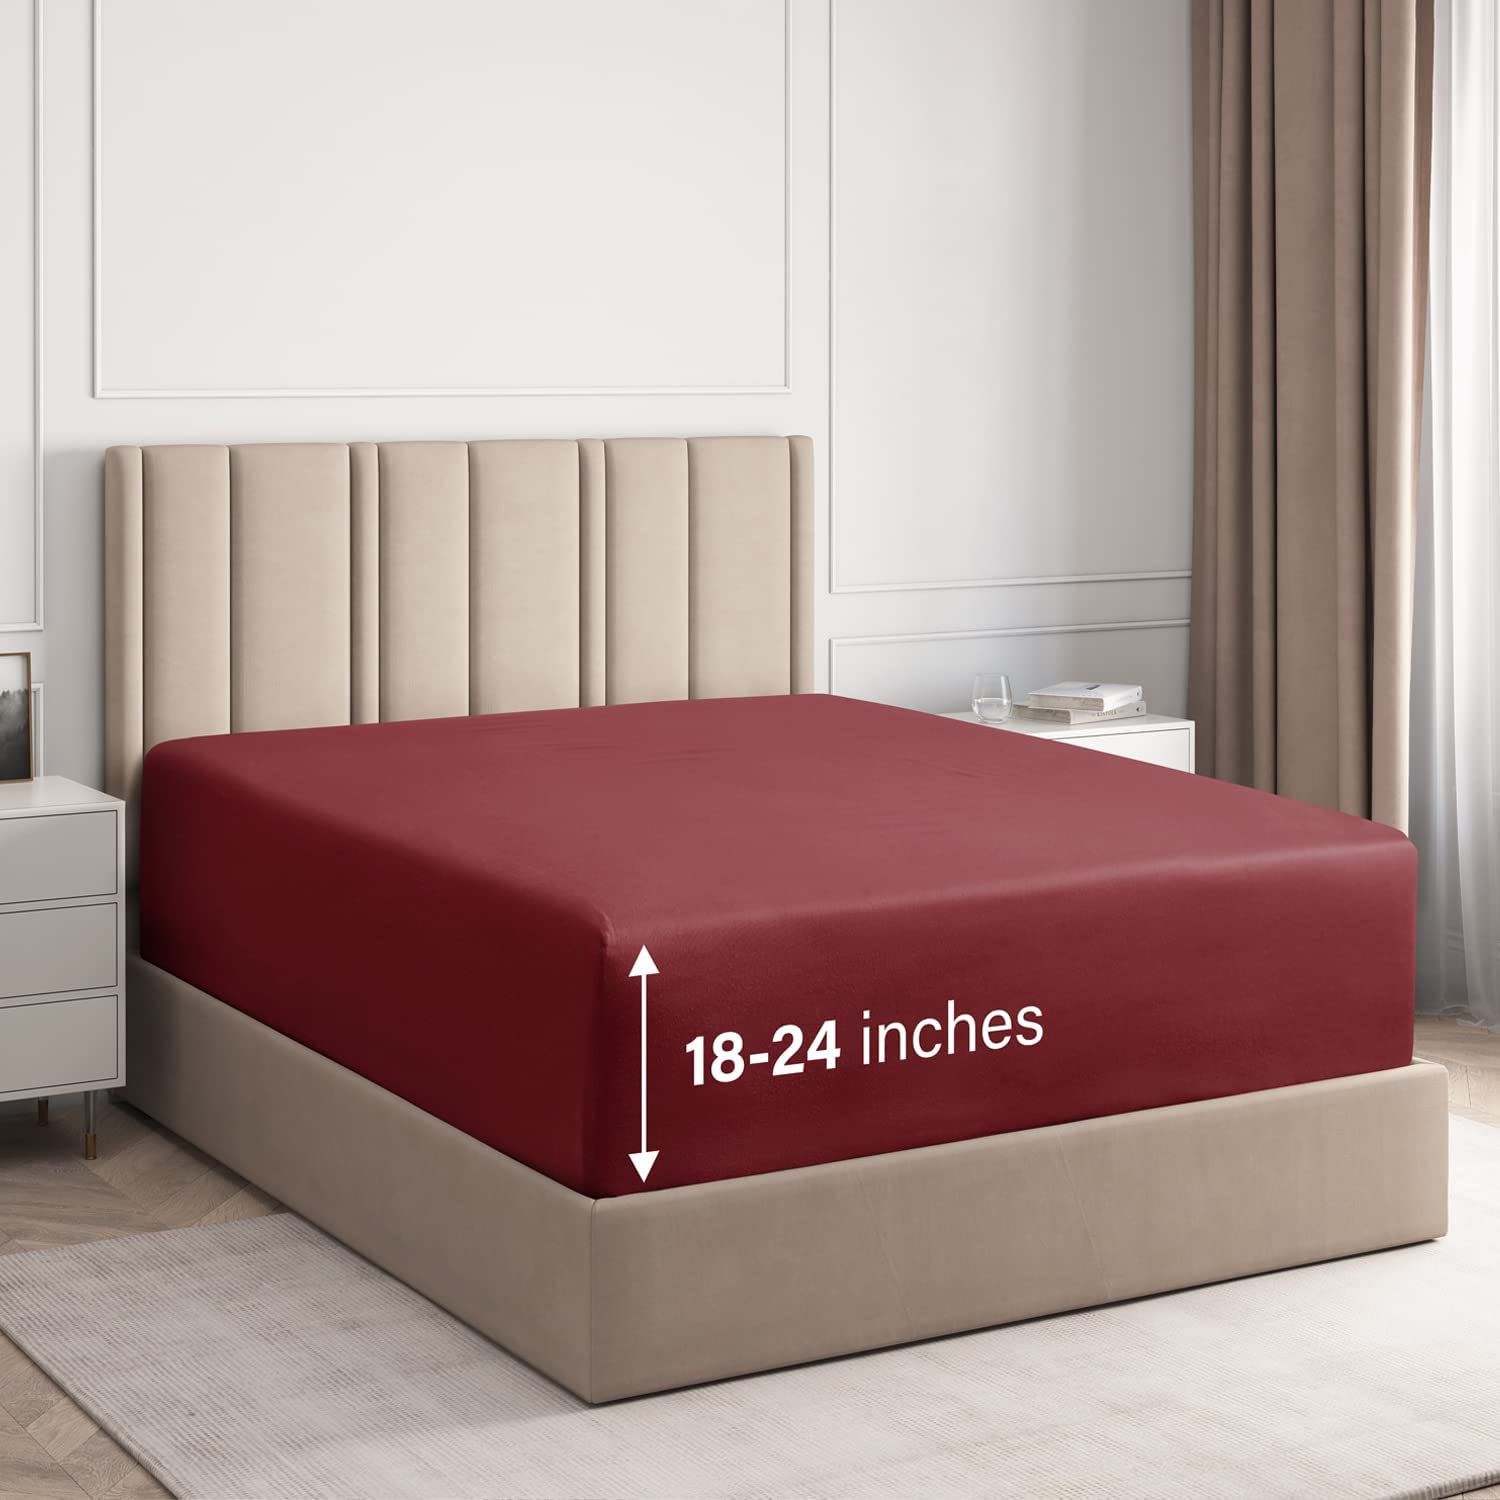 Cotton 400 Thread Count Deep Pocket Single Fitted Sheet - Burgundy